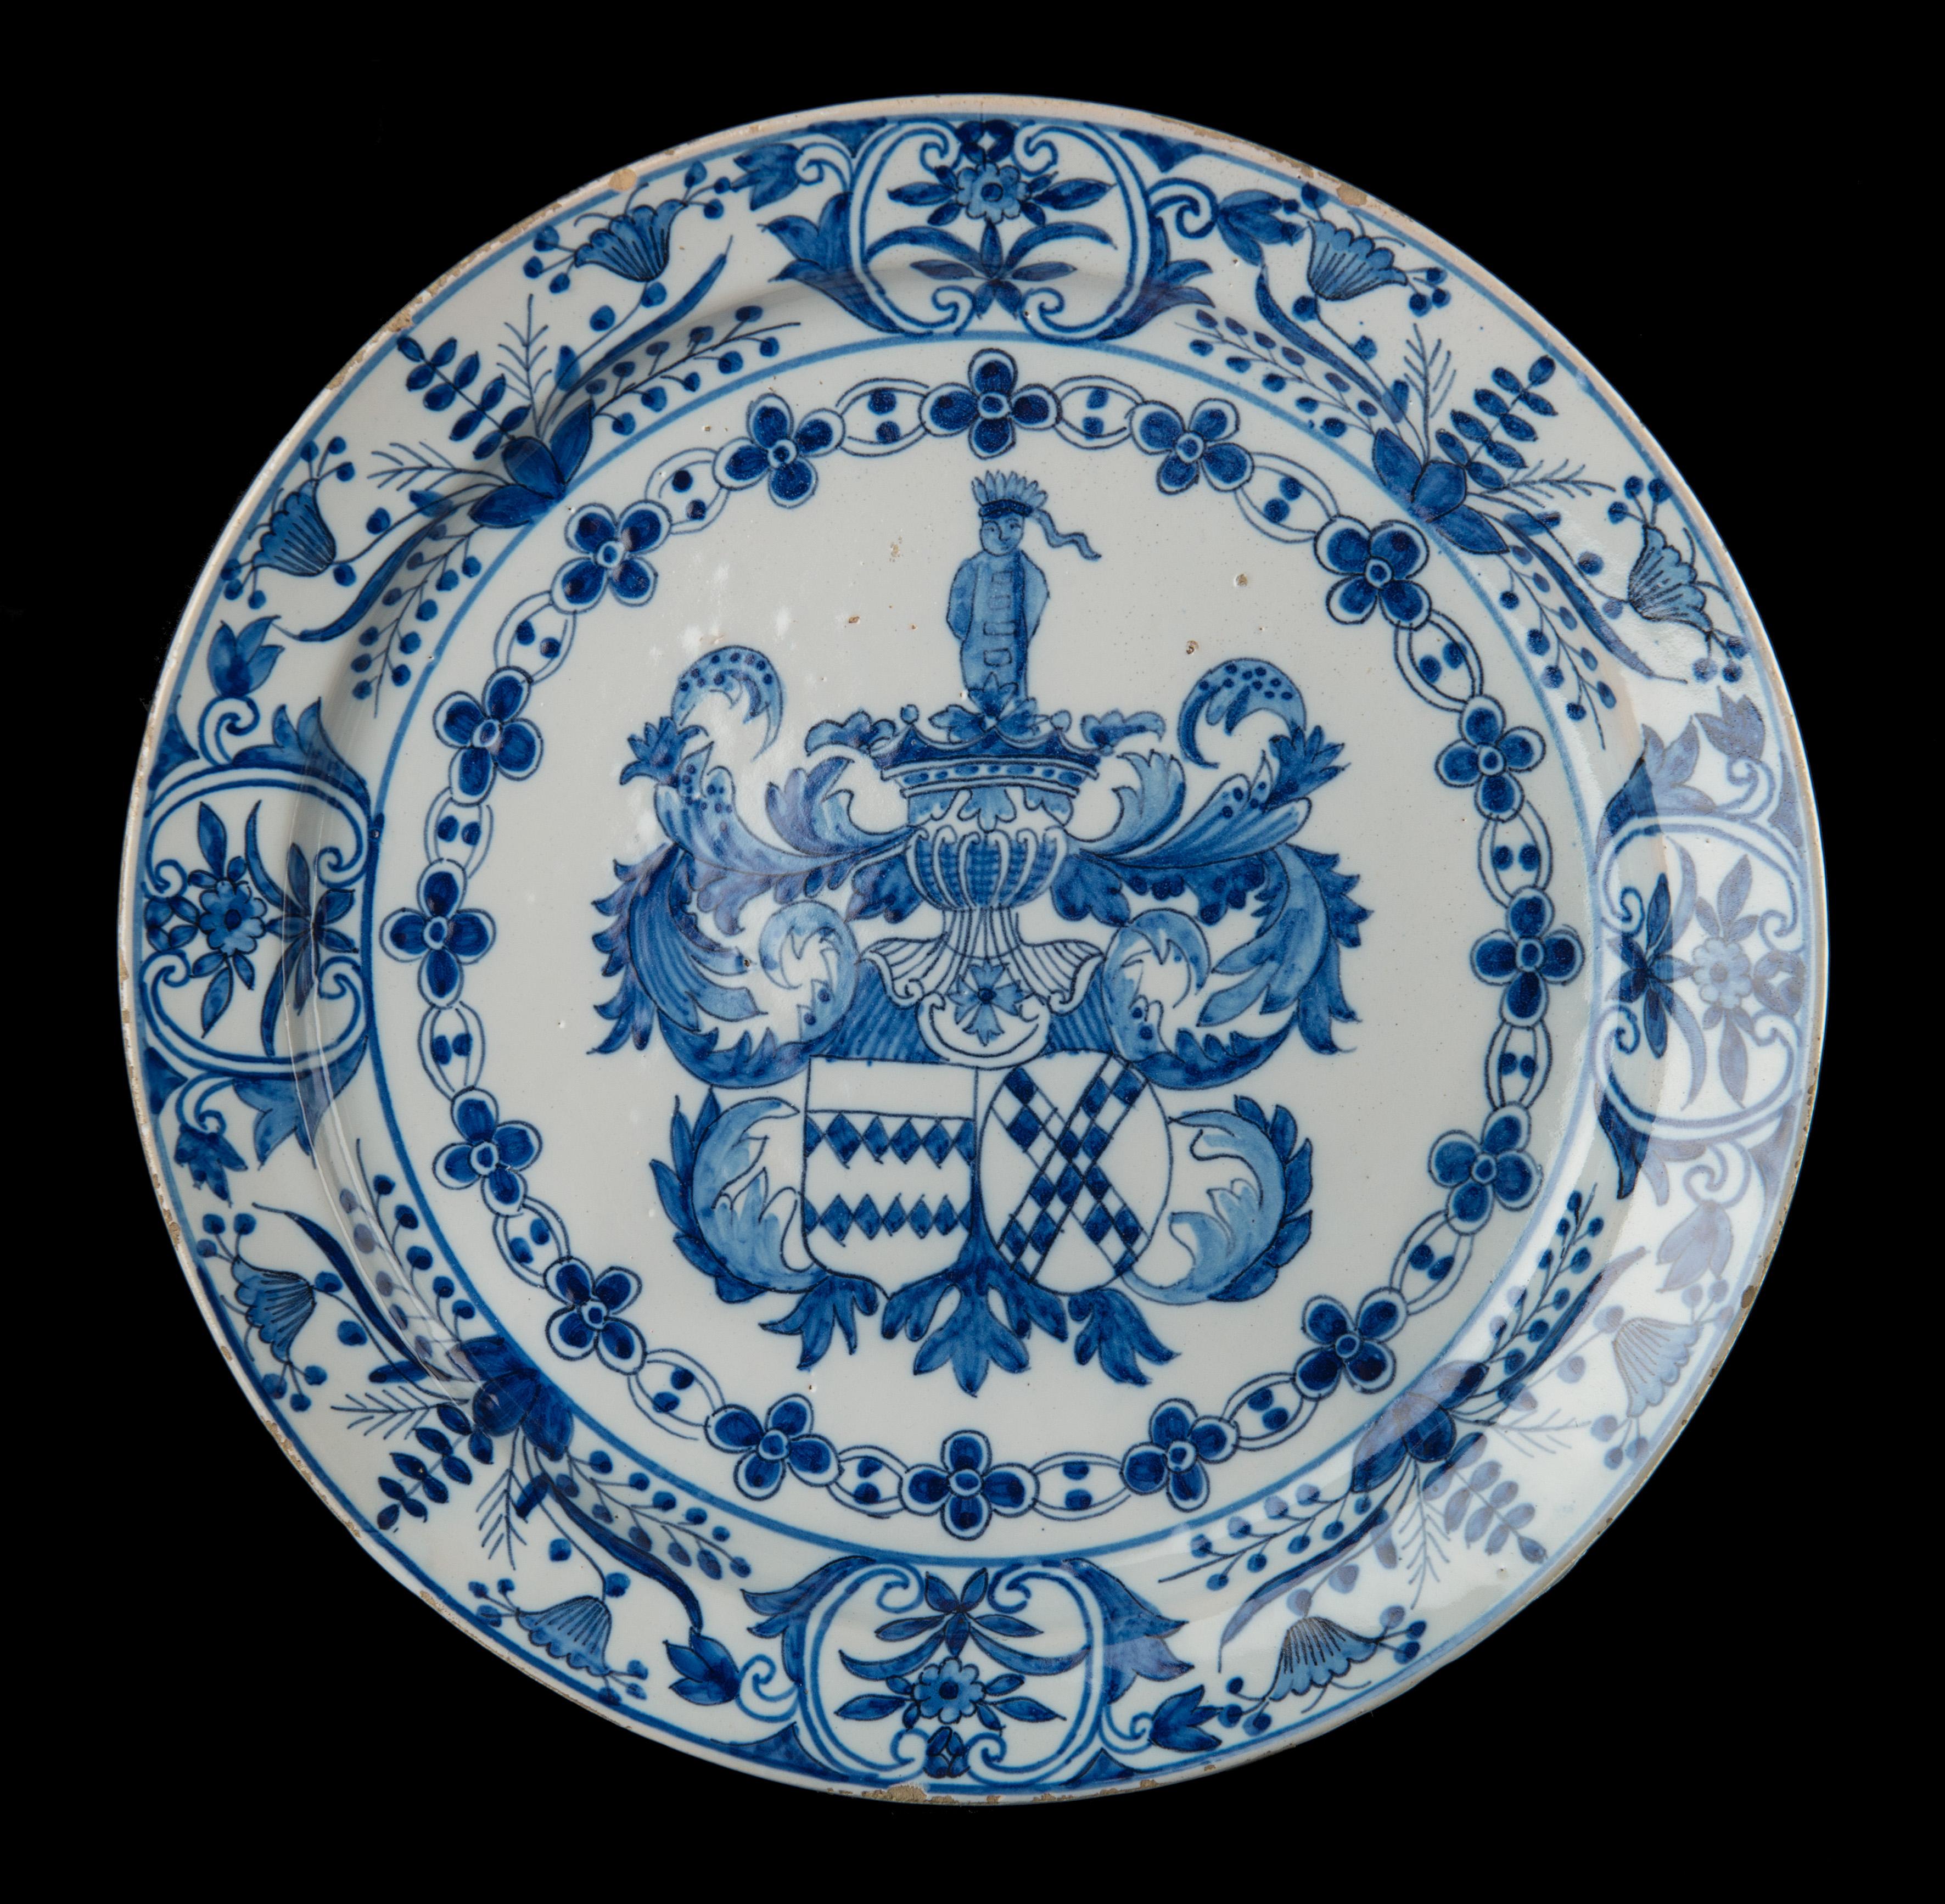 Blue and white armorial plate with the coat of arms of Johan van der Does and Elisabeth van der Dussen. 
Delft, 1686-1701. The Greek A pottery. Mark: AK, period of Adrianus Kocx (1686-1701) 

The blue and white plate stands on a foot rim and is